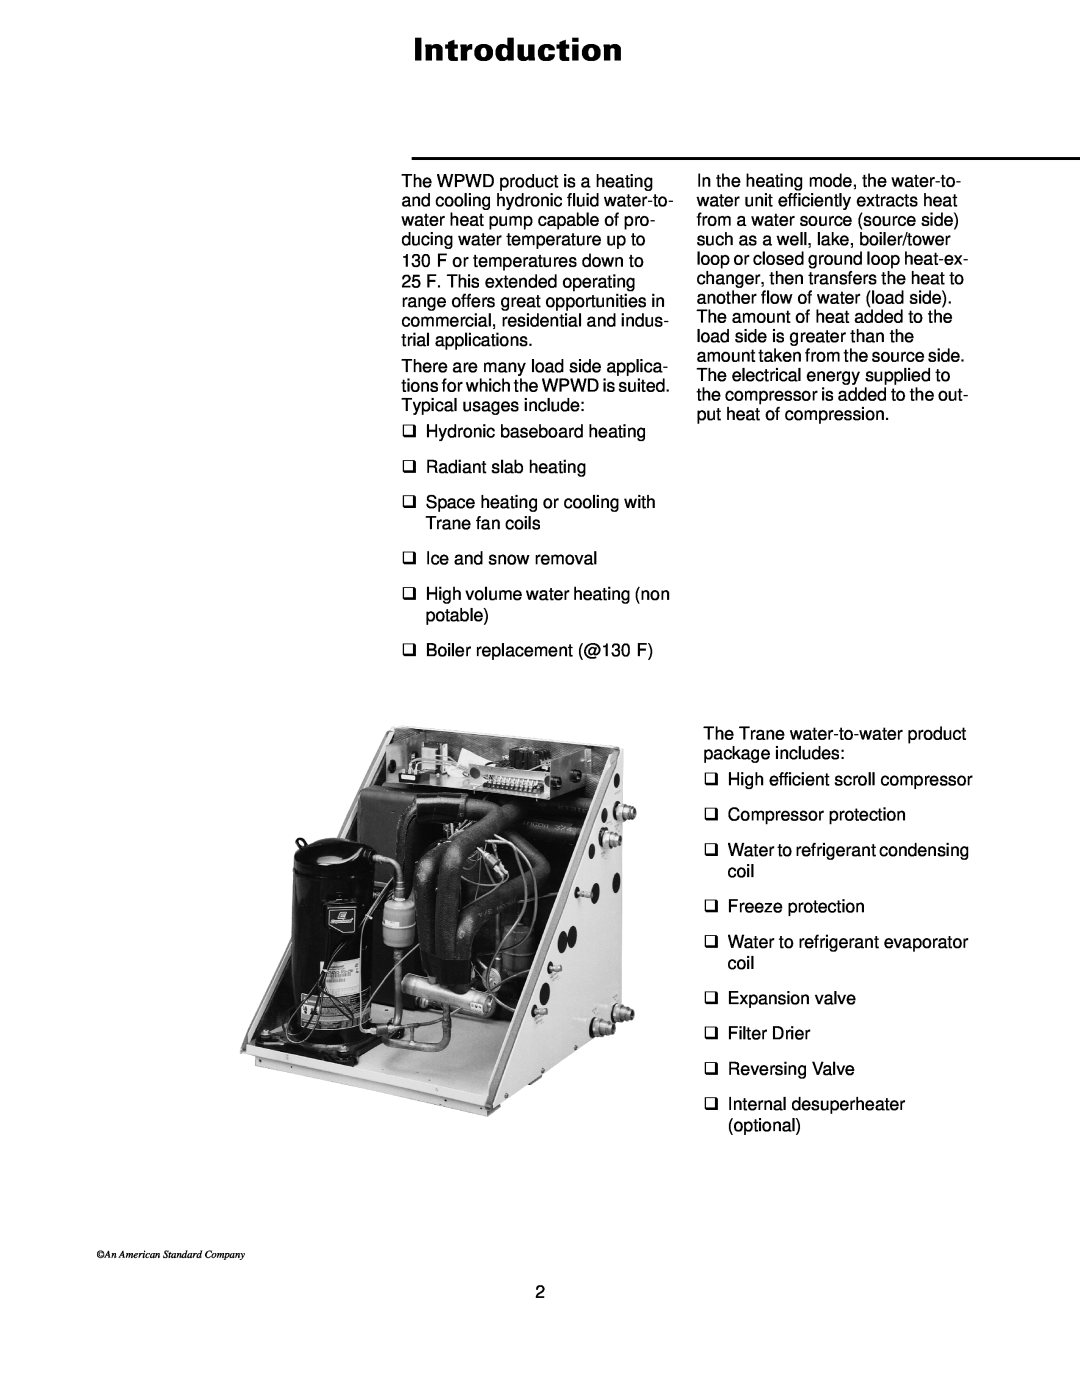 Trane WSHP-DS-6 manual Introduction 